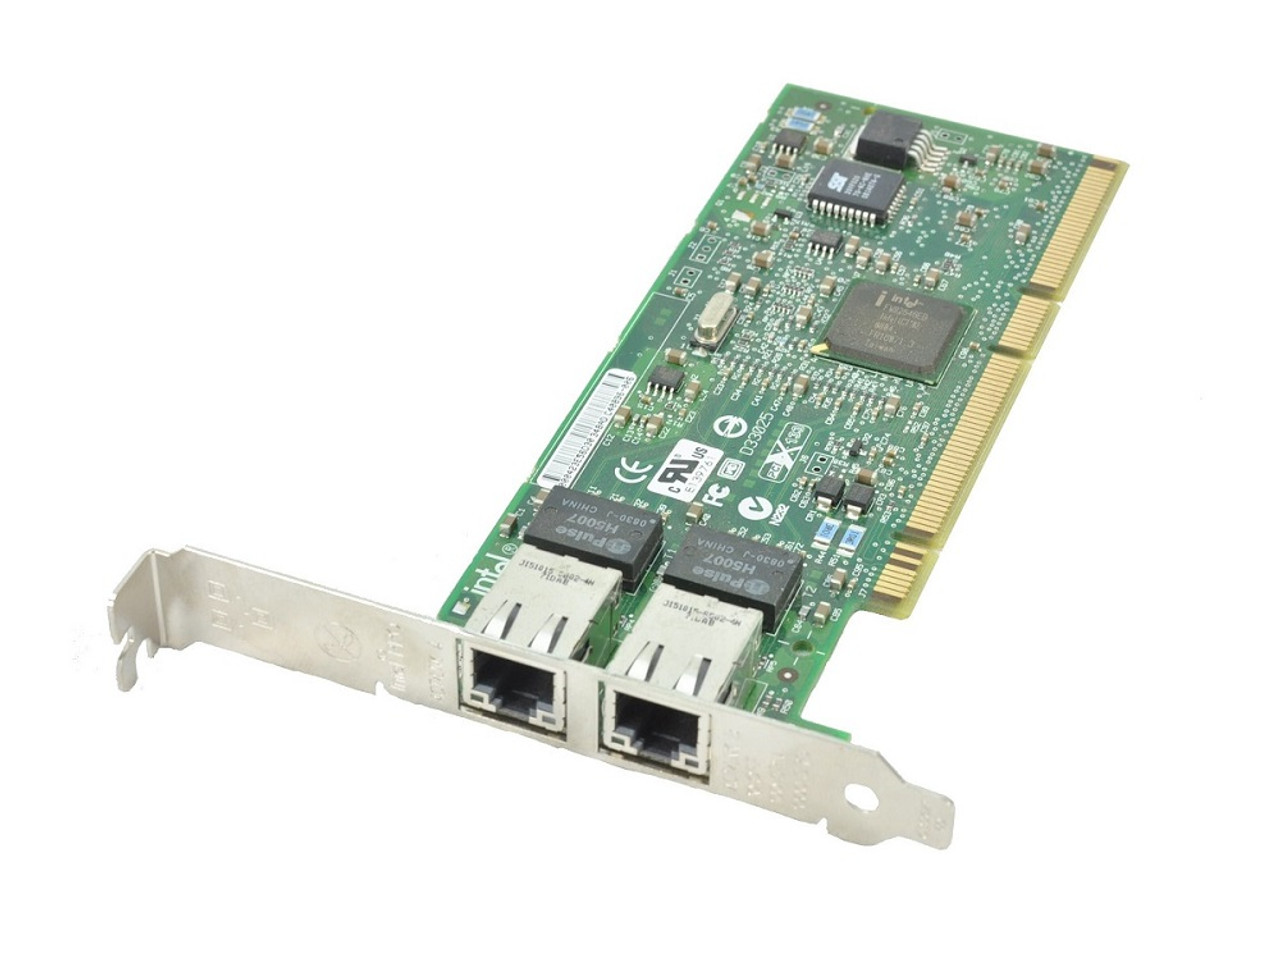 540-BBHI - Dell Intel X540 DP - Network Adapter - 10GB Ethernet X 2 - with Intel I350 DP Network Daughter Card